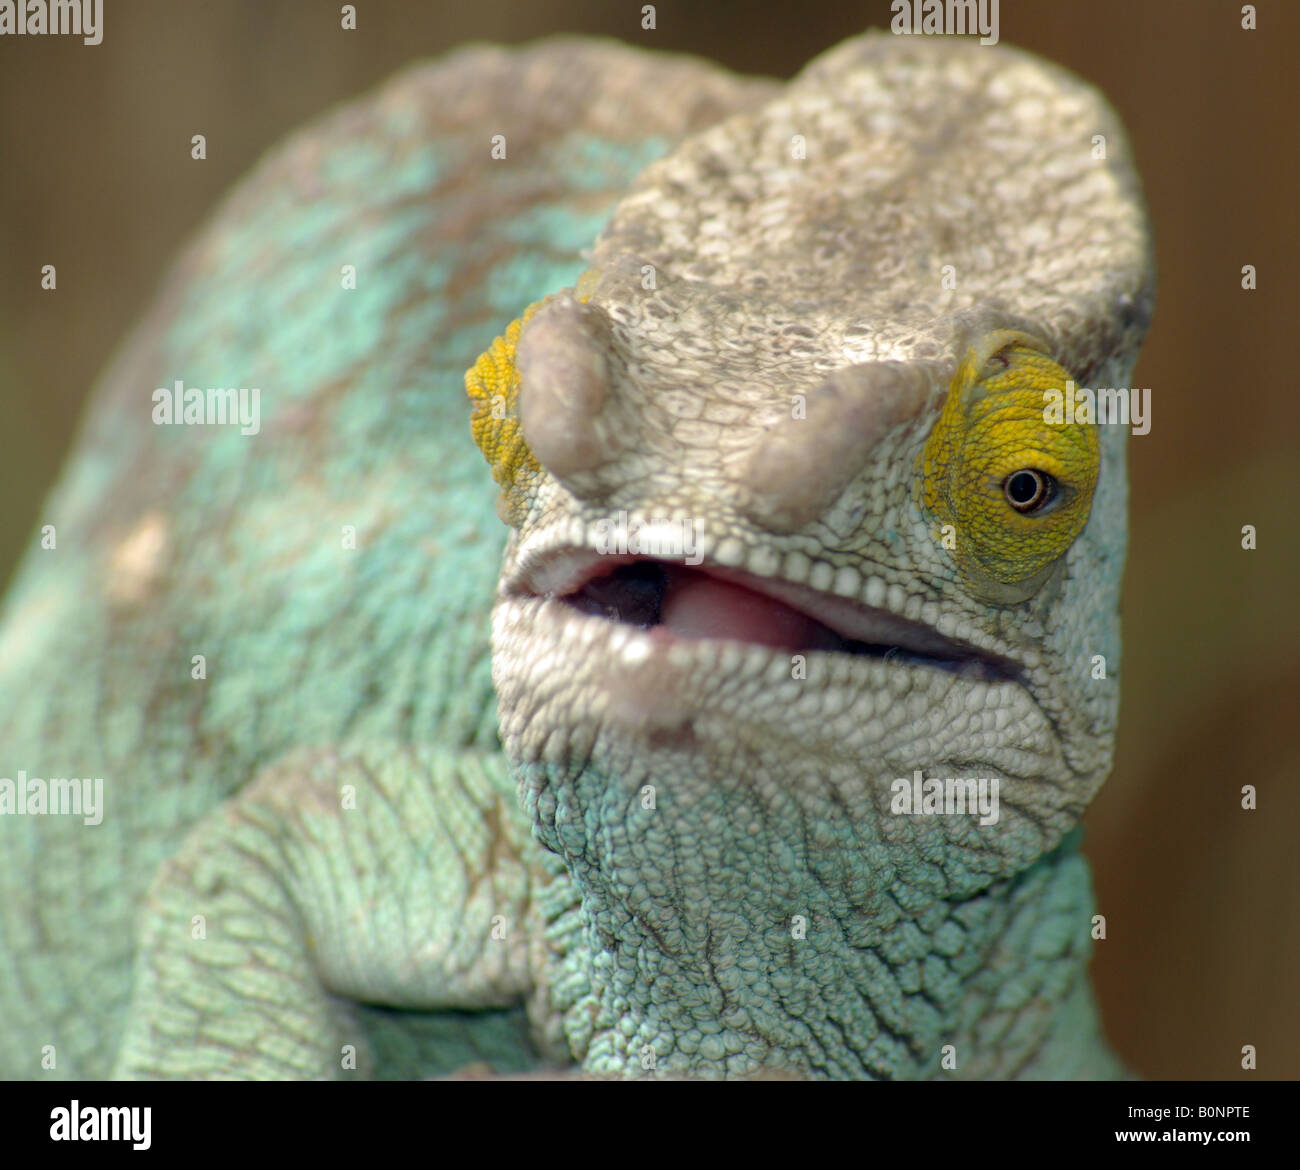 Close up of the head of a Parsons Chameleon (Chameleo parsonii). Stock Photo